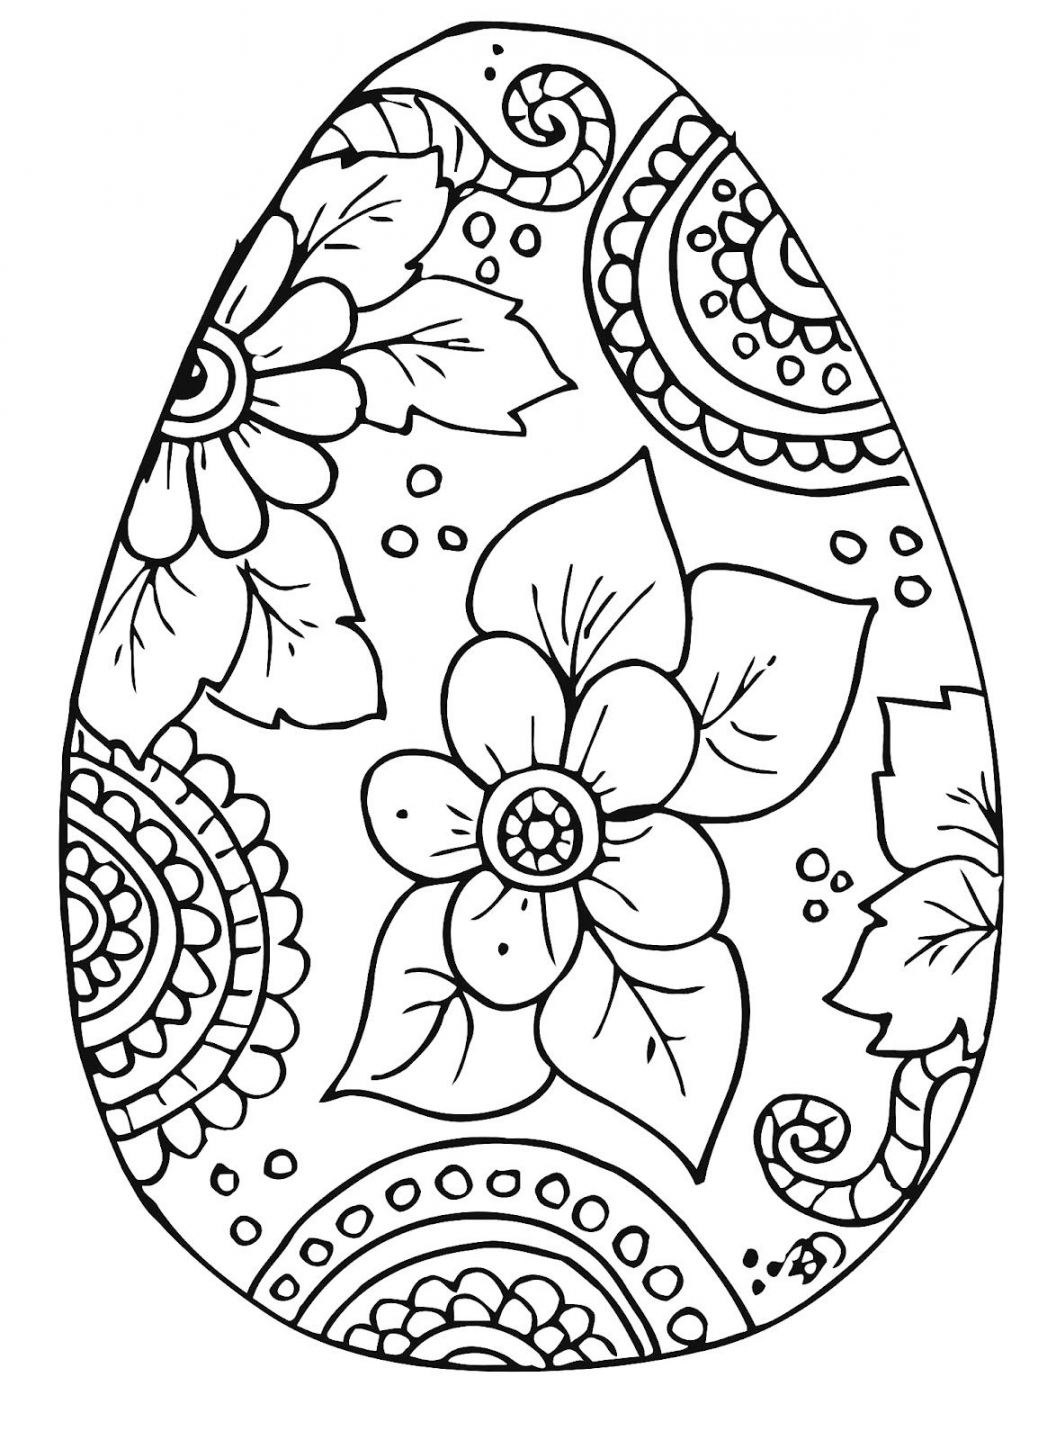 Easter Coloring Pages Free Printable - Printable - B.D